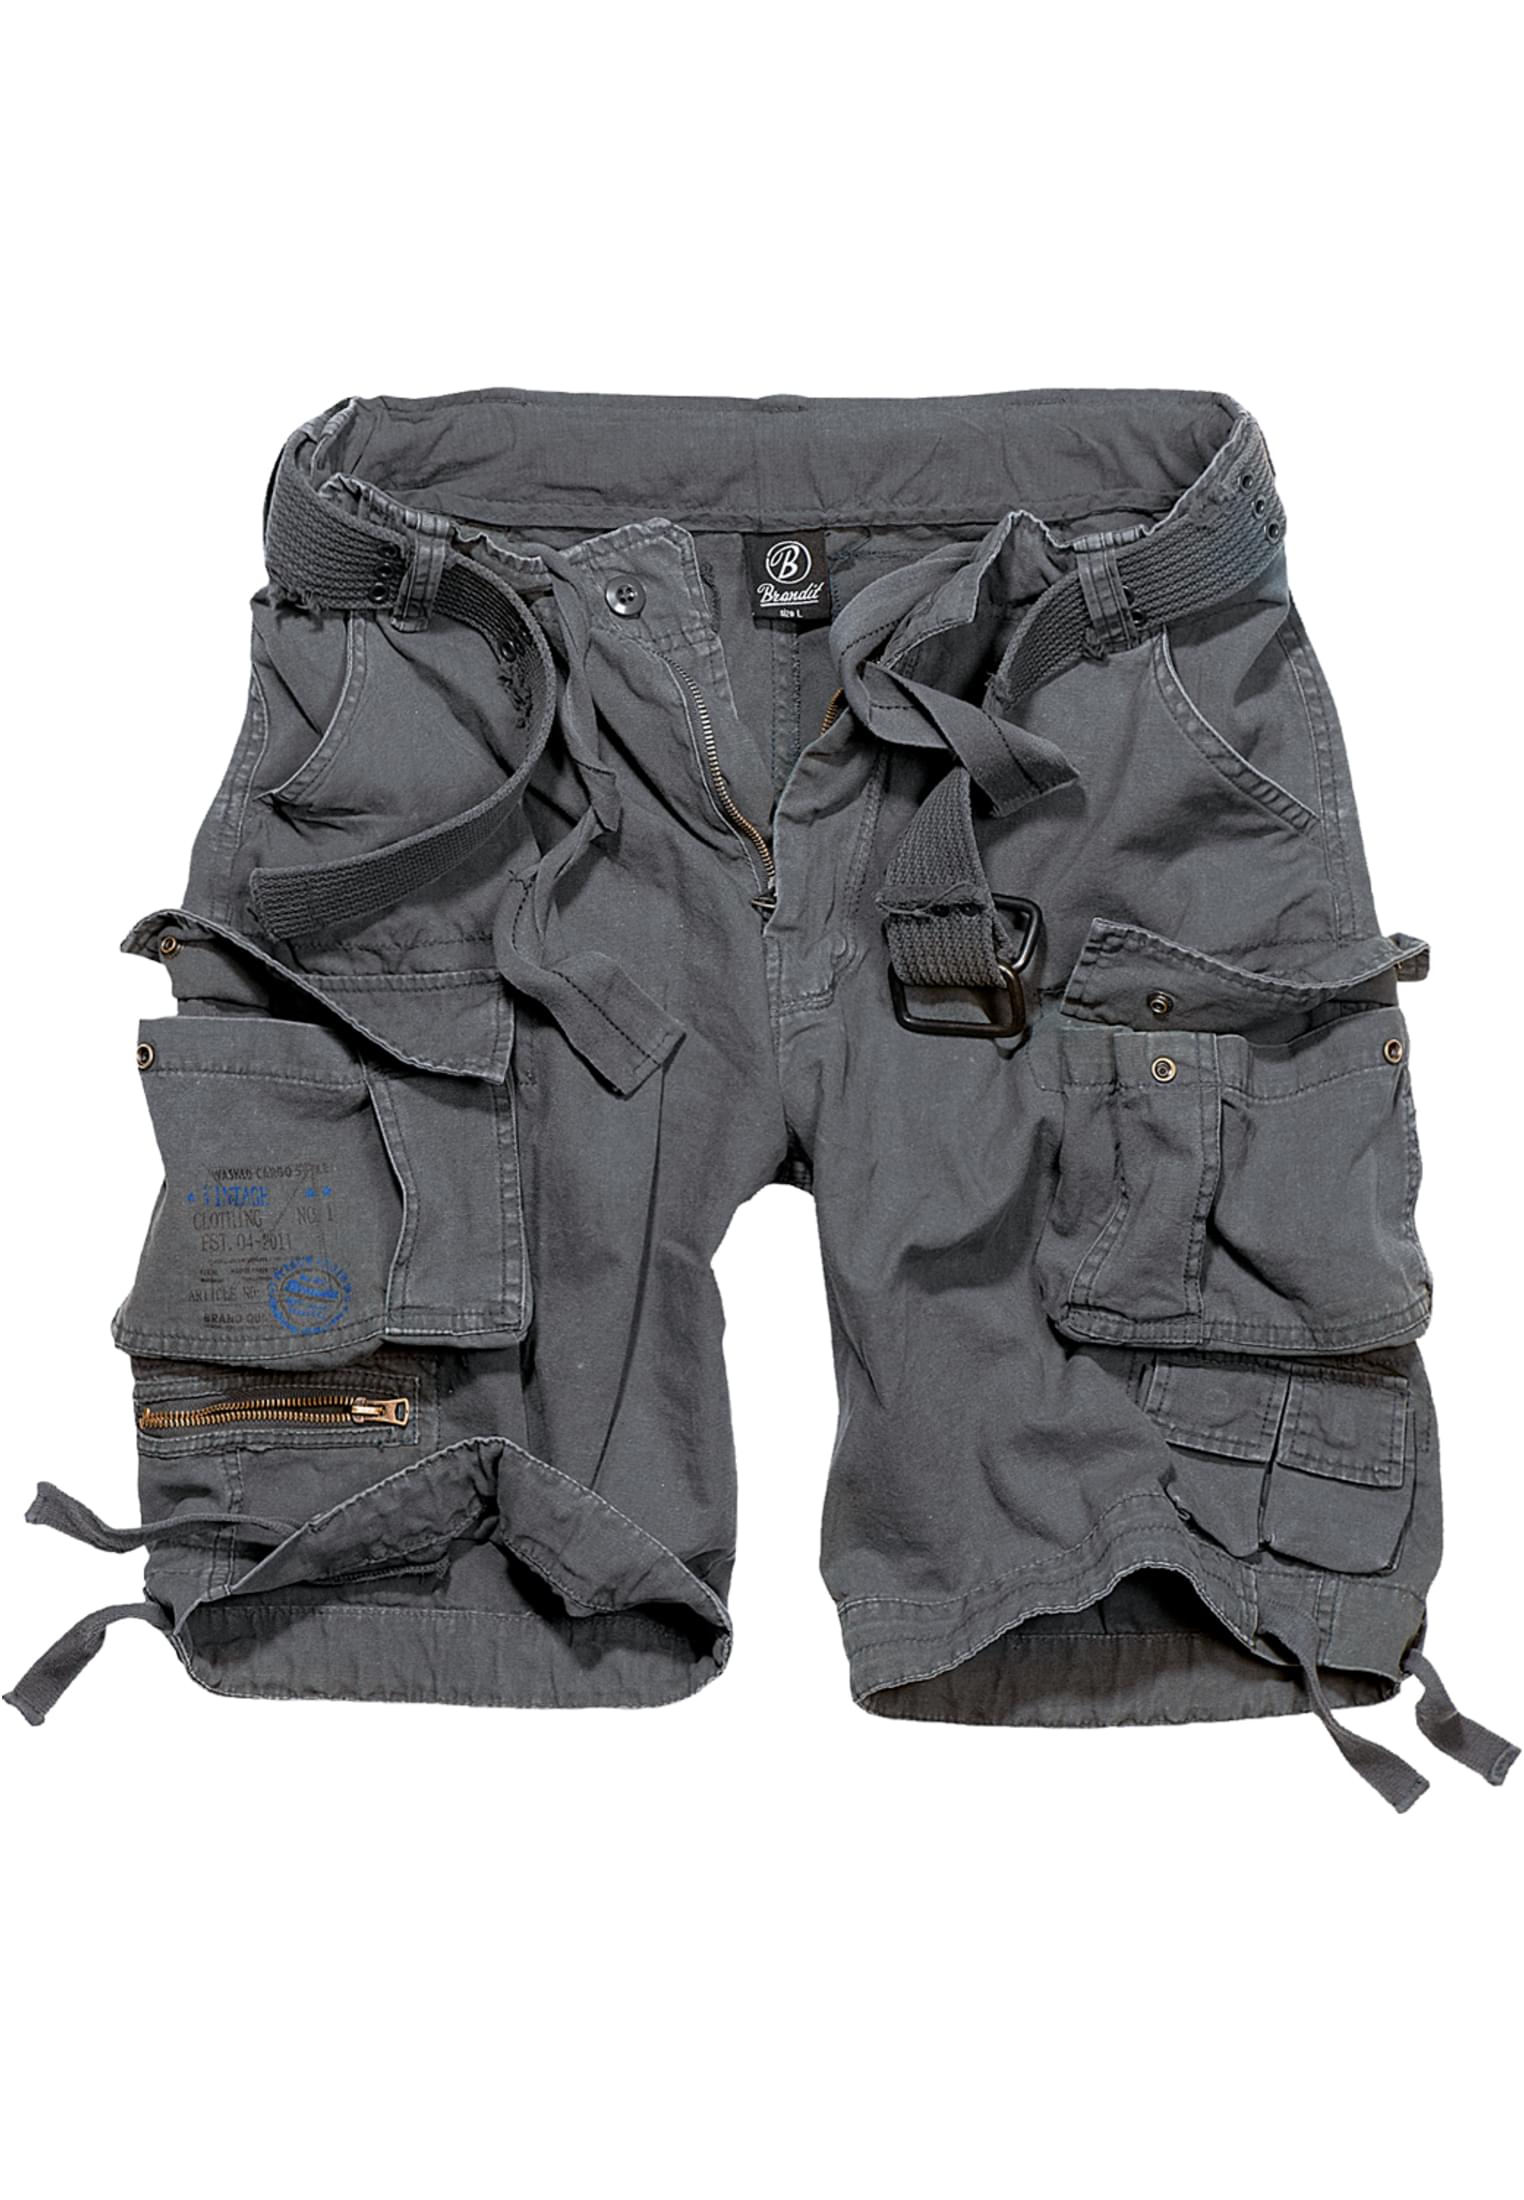 Shorts Savage Vintage Cargo Shorts in Farbe charcoal